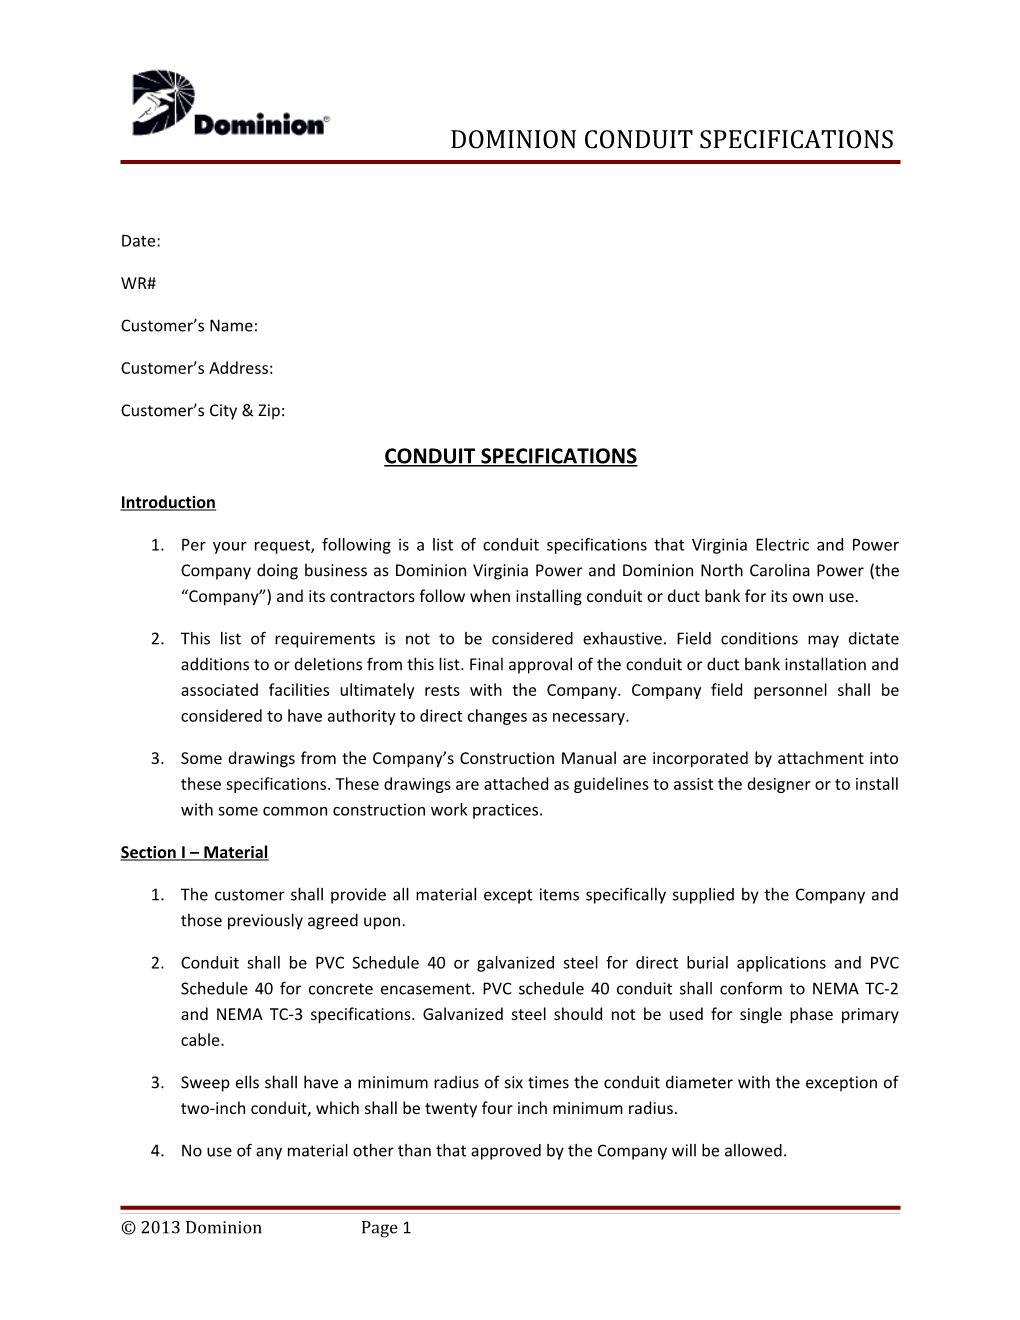 Conduit Specifications Agreement